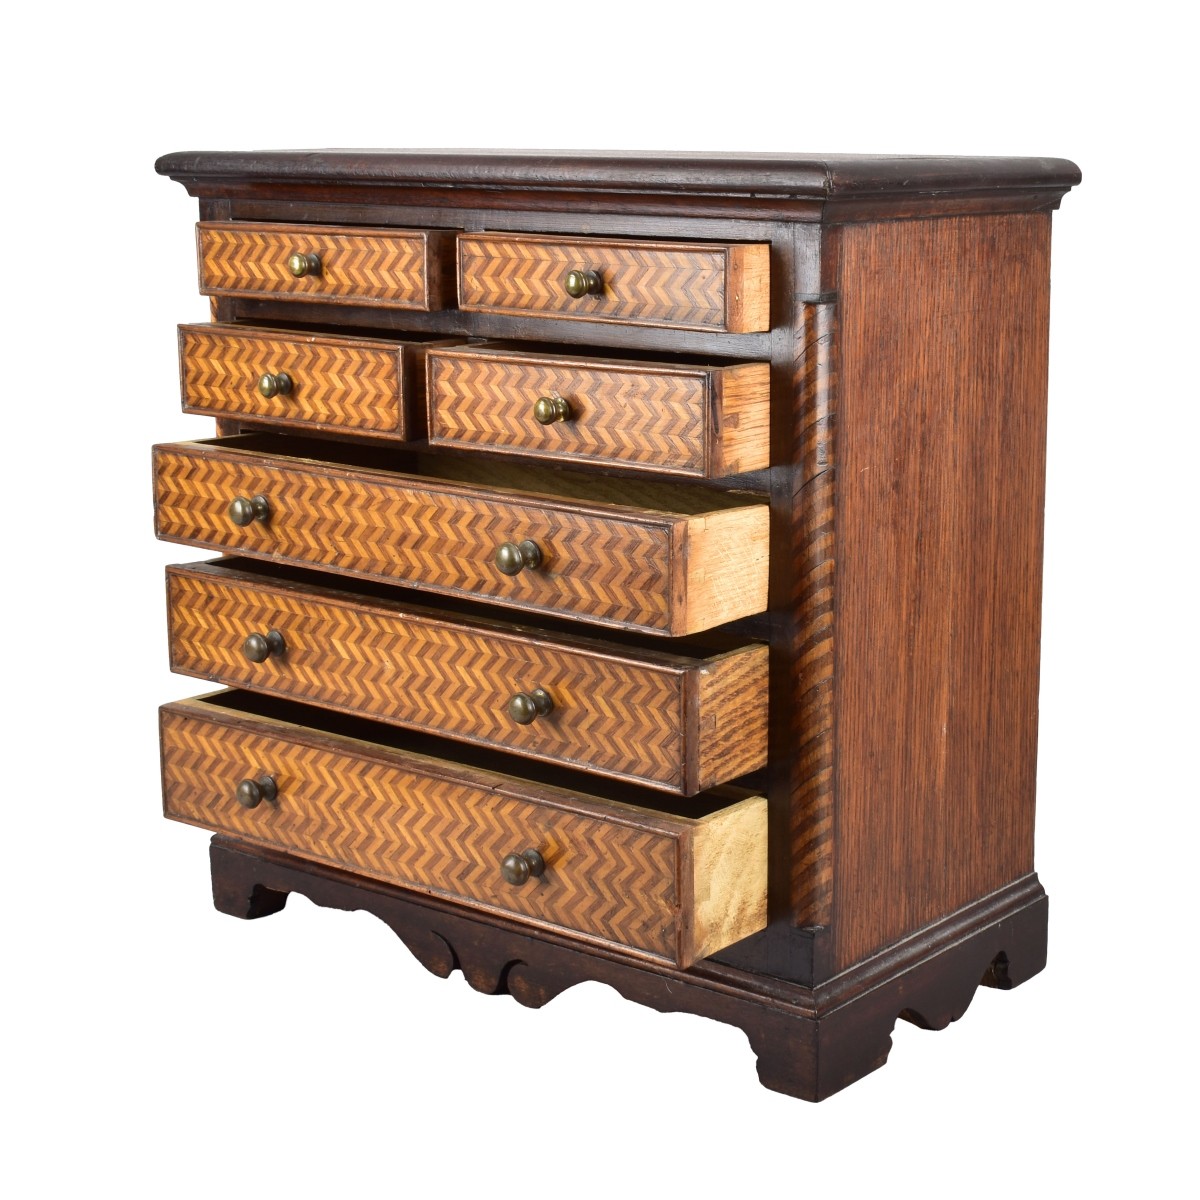 Antique English Marquetry Inlaid Chest of Drawers